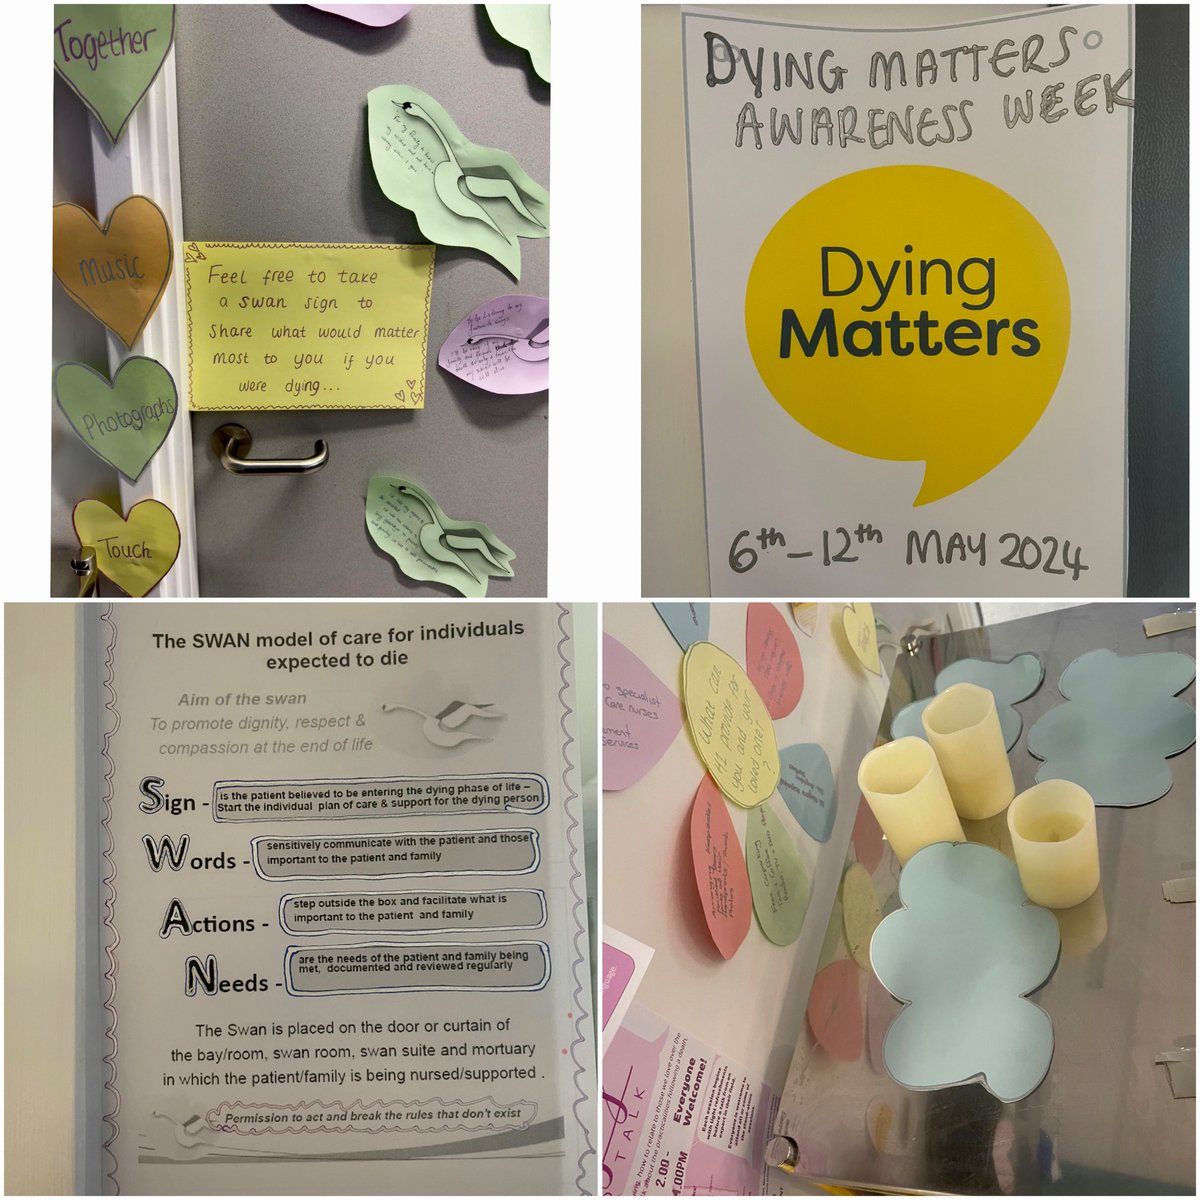 #DyingMattersAwarenessWeek ! An absolute Important topic to ensure care provided at the end of a life is of the highest quality❤️ Great team discussion. Thanks to our link nurses Hayley, Kath,Daisy&Sonia for the display board! @dyingmatters @NCANursing @giphties @SalfordCO_NHS